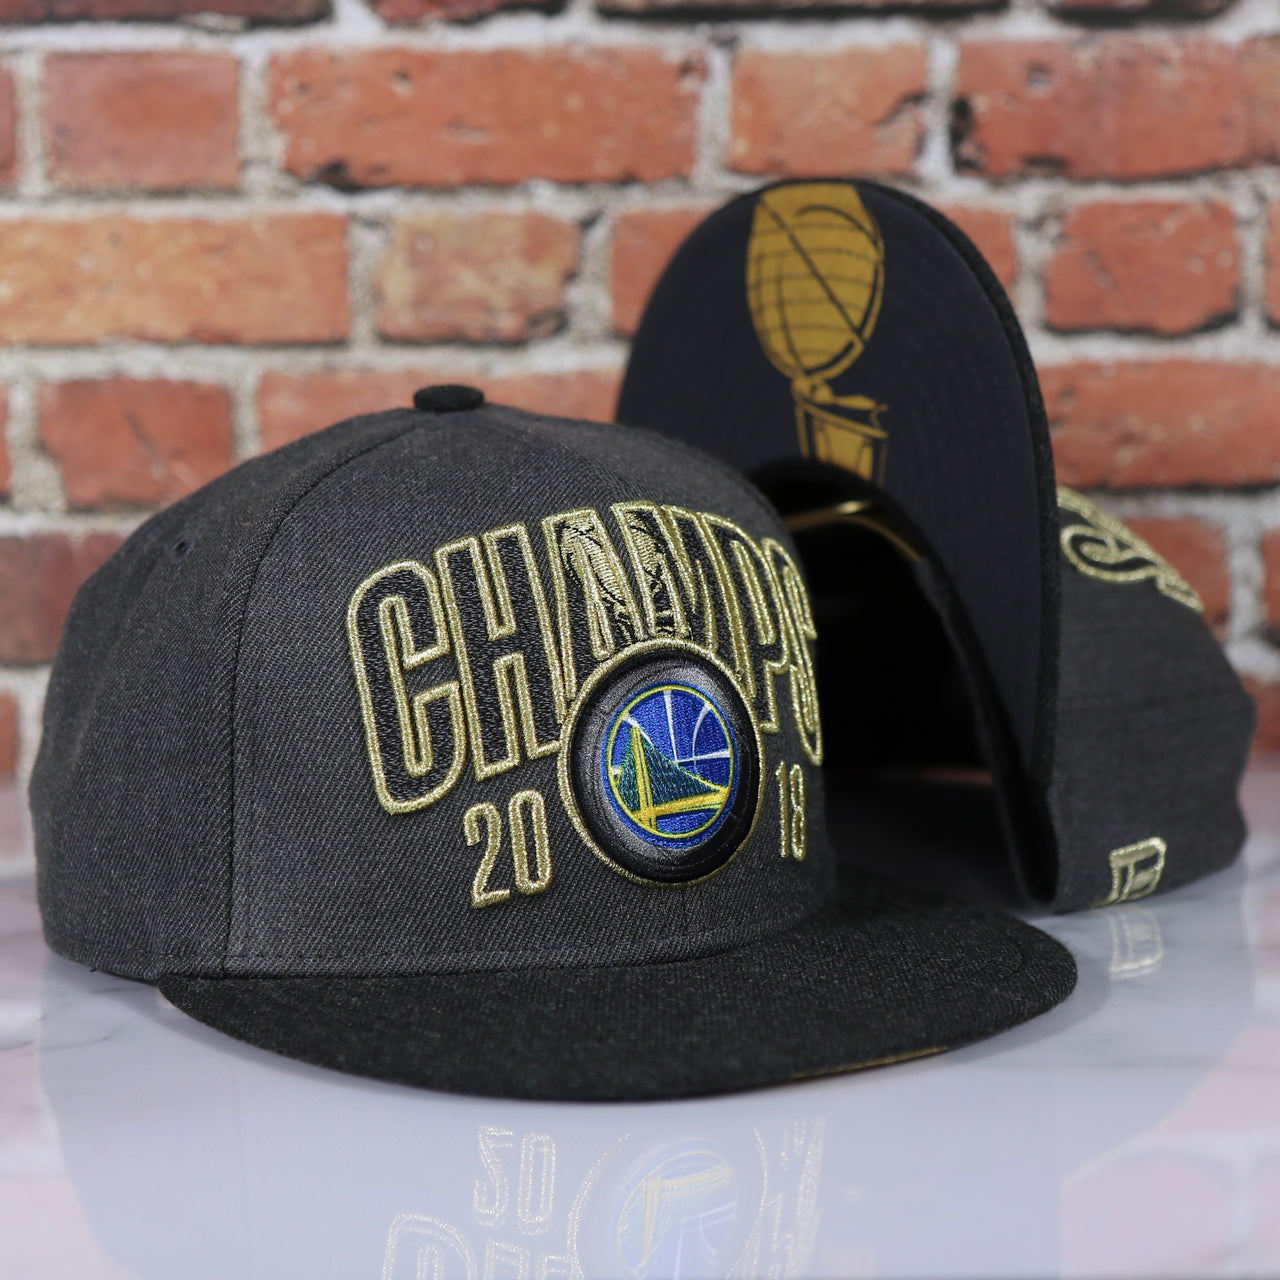 YOUTH 2018 NBA Finals Golden State Warriors Championship Kid's Snapback Hat